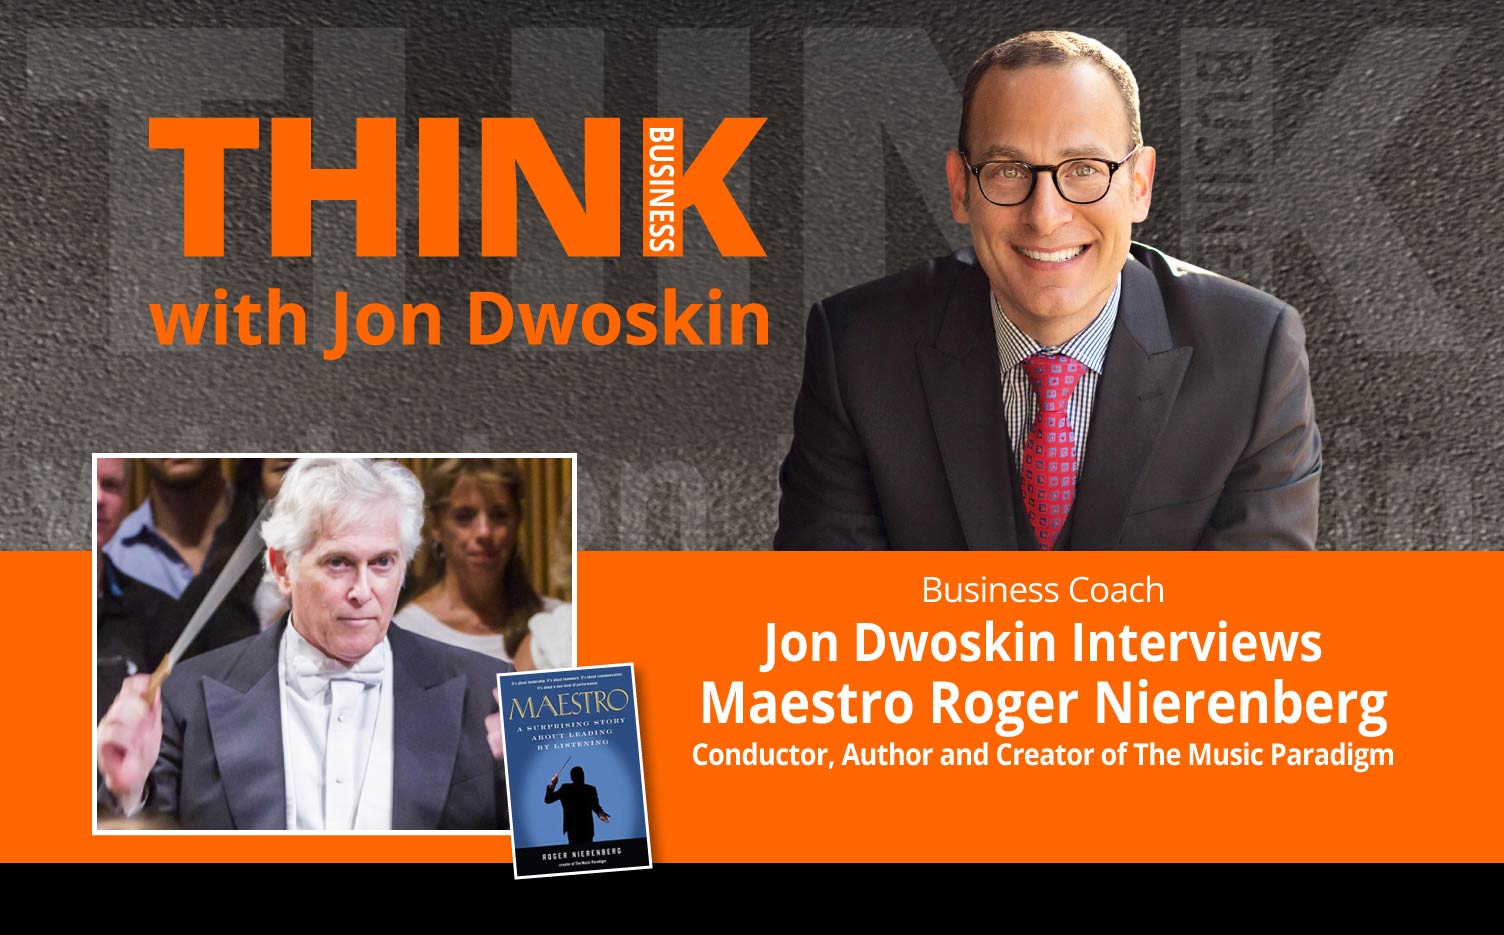 THINK Business Podcast: Jon Dwoskin Interviews Maestro Roger Nierenberg, Conductor, Author and Creator of The Music Paradigm